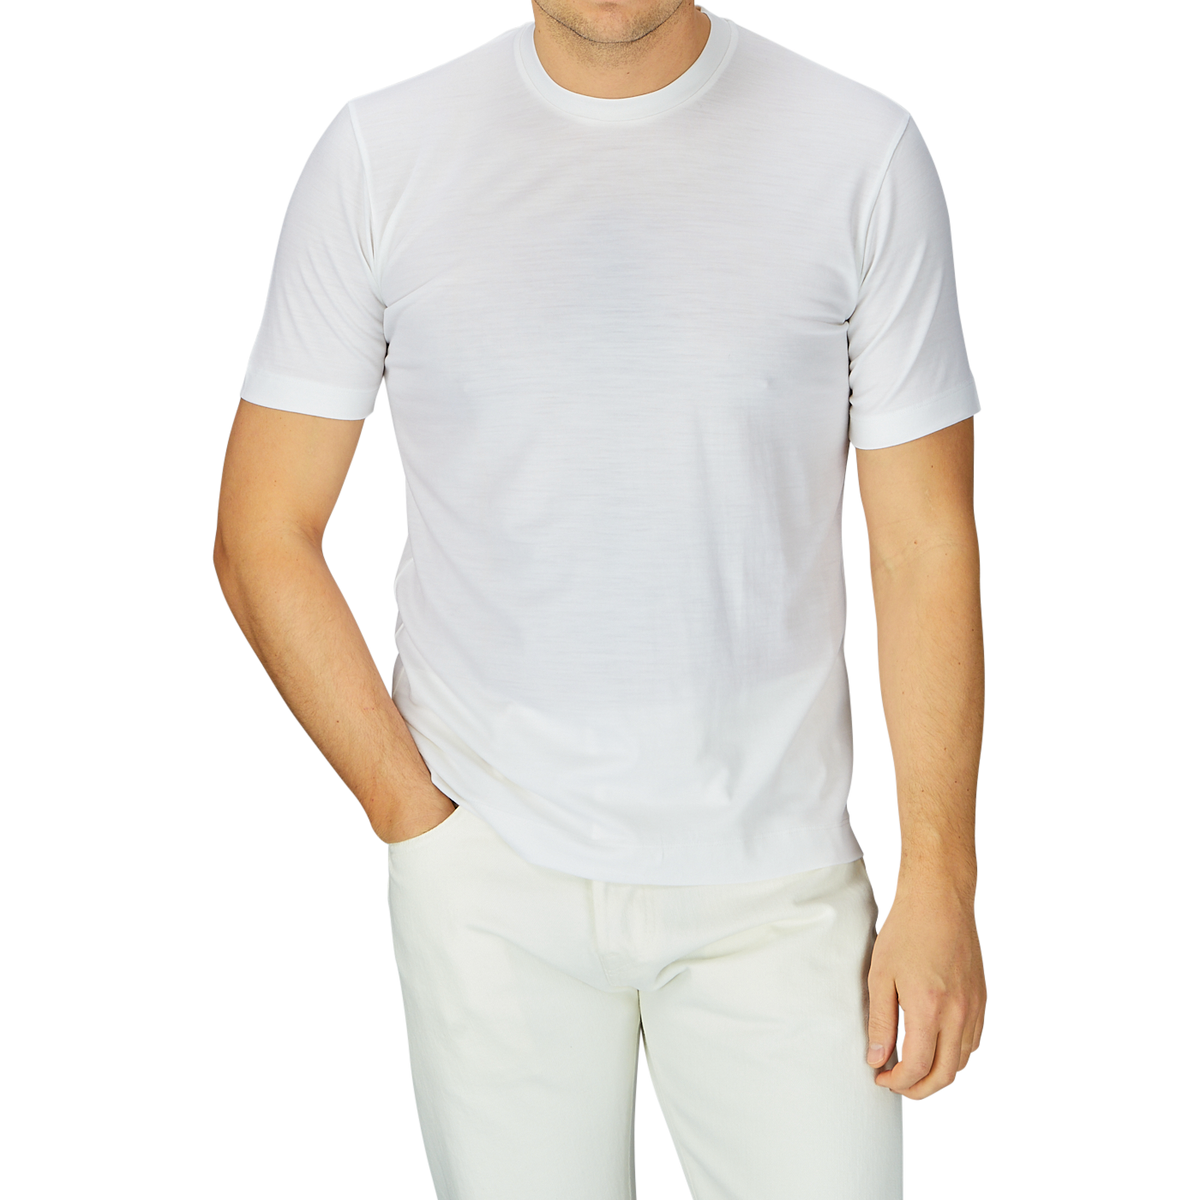 Man in a breathable Off-White Merino Wool T-shirt from Mazzarelli and light beige pants, standing with one hand partially in his pocket against a grey background.